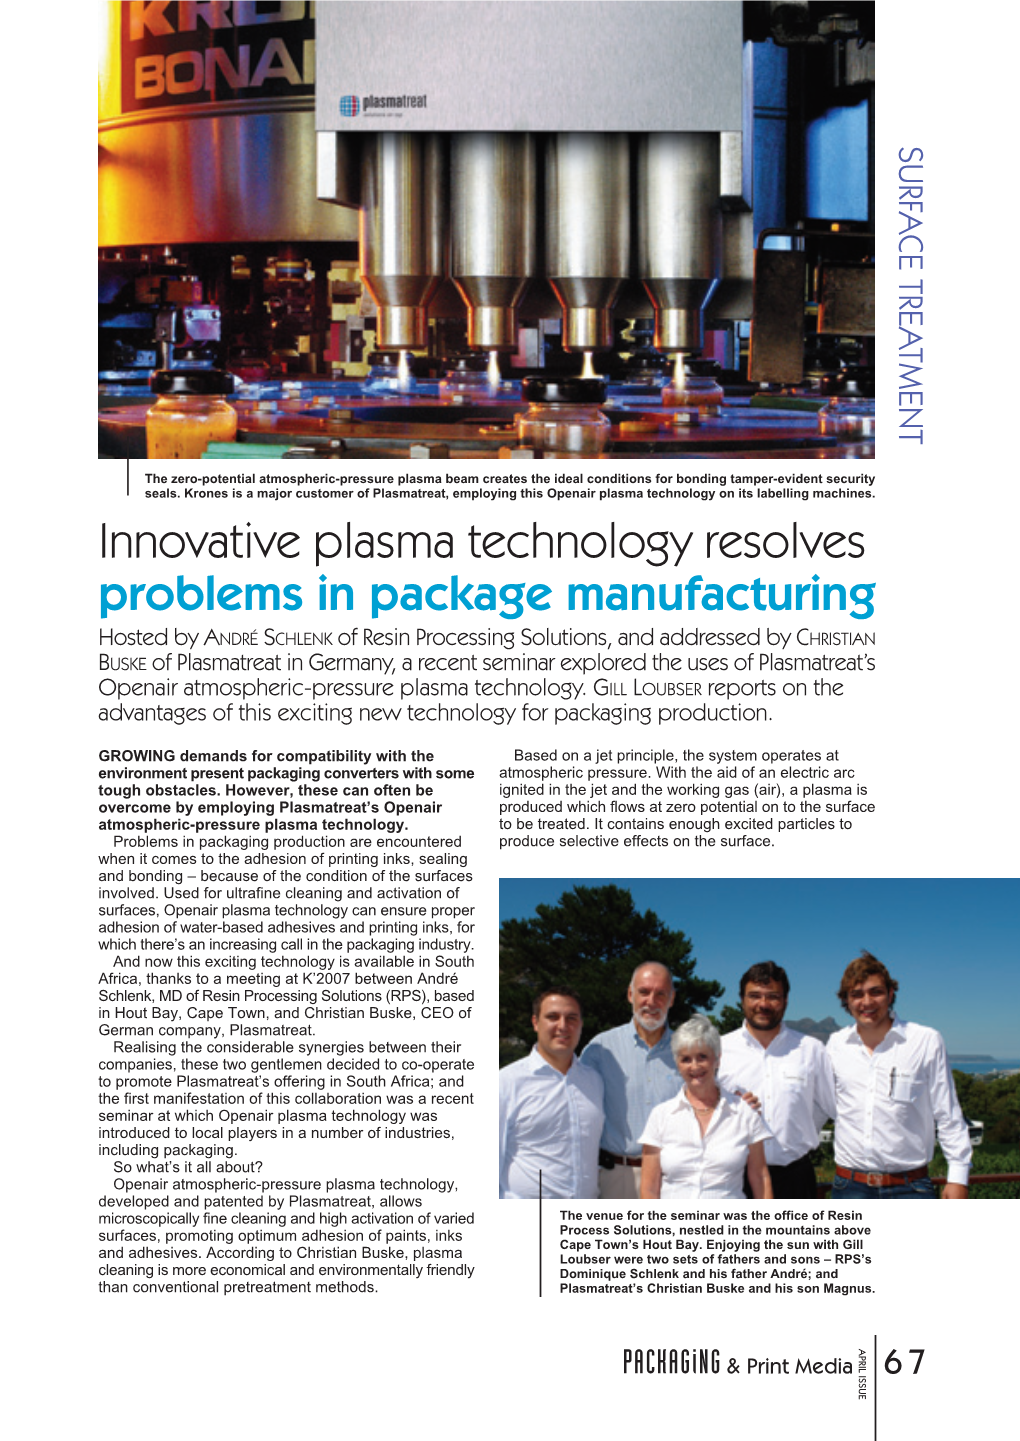 Innovative Plasma Technology Resolves Problems in Package